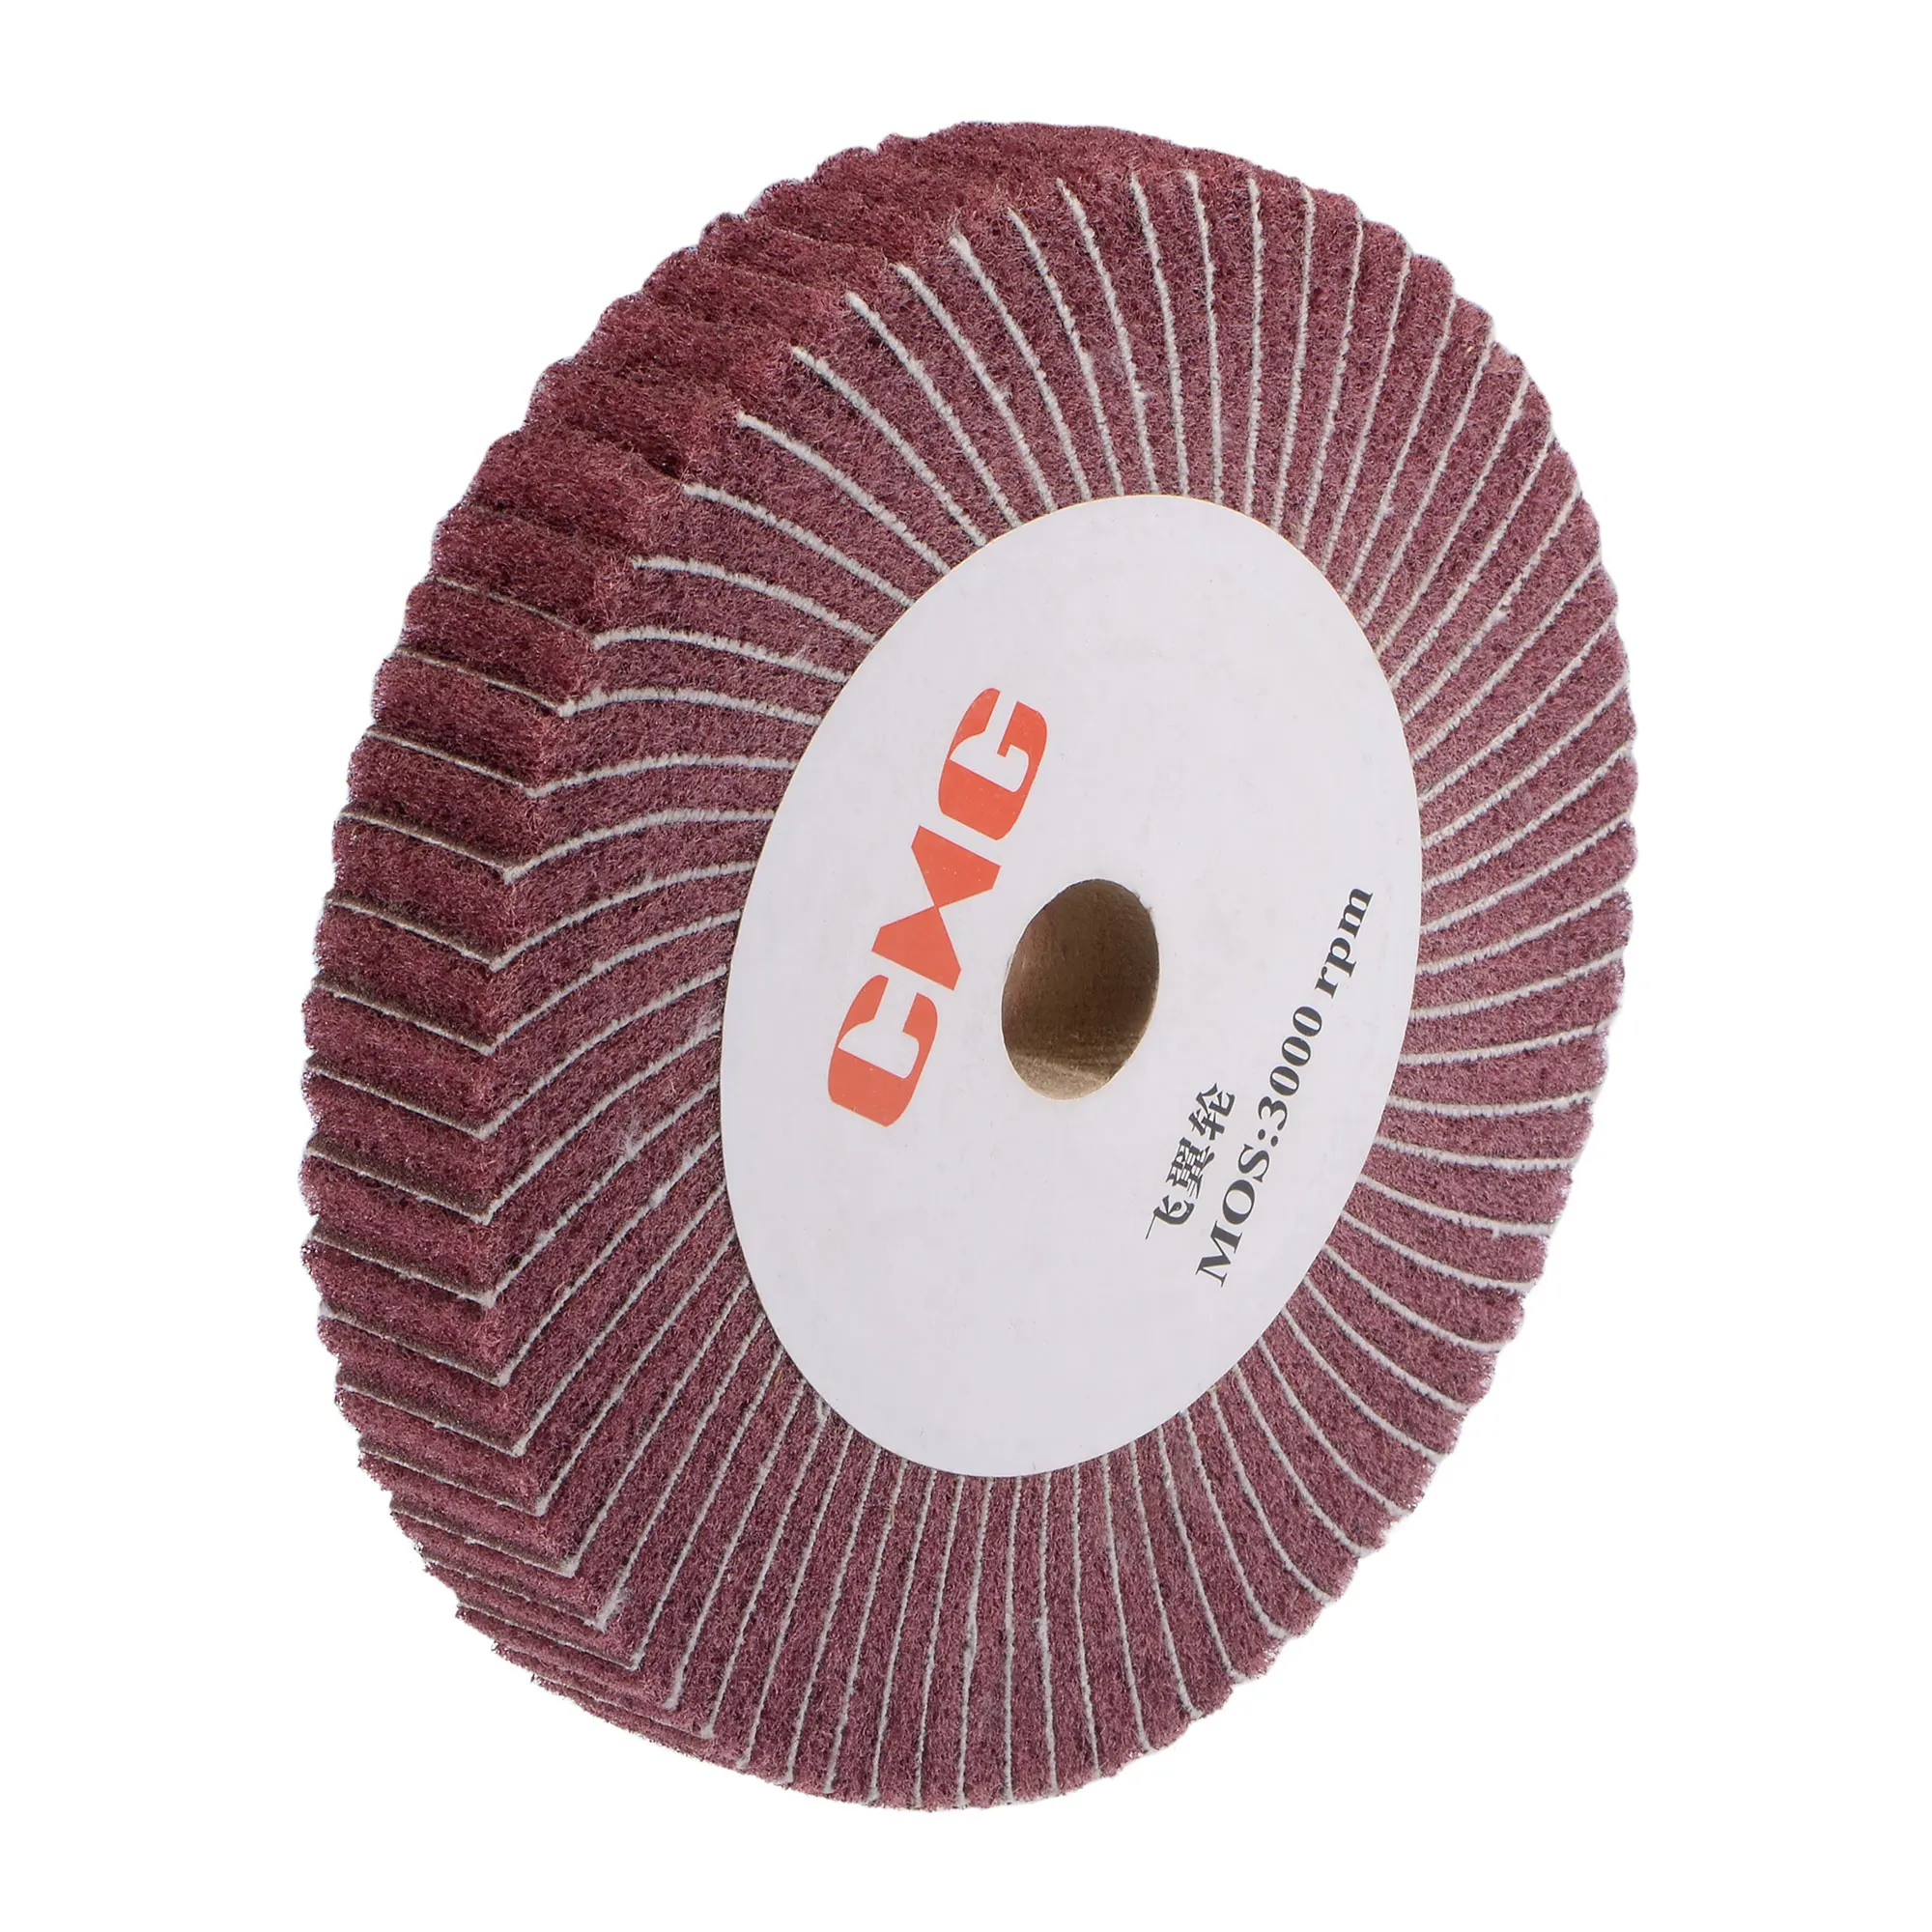 Uxcell 150mm x 25mm 320 Grit Non-Woven Polishing Burnishing Wheel Abrasive Cloth Nylon Wire Drawing Flap Wheel Red